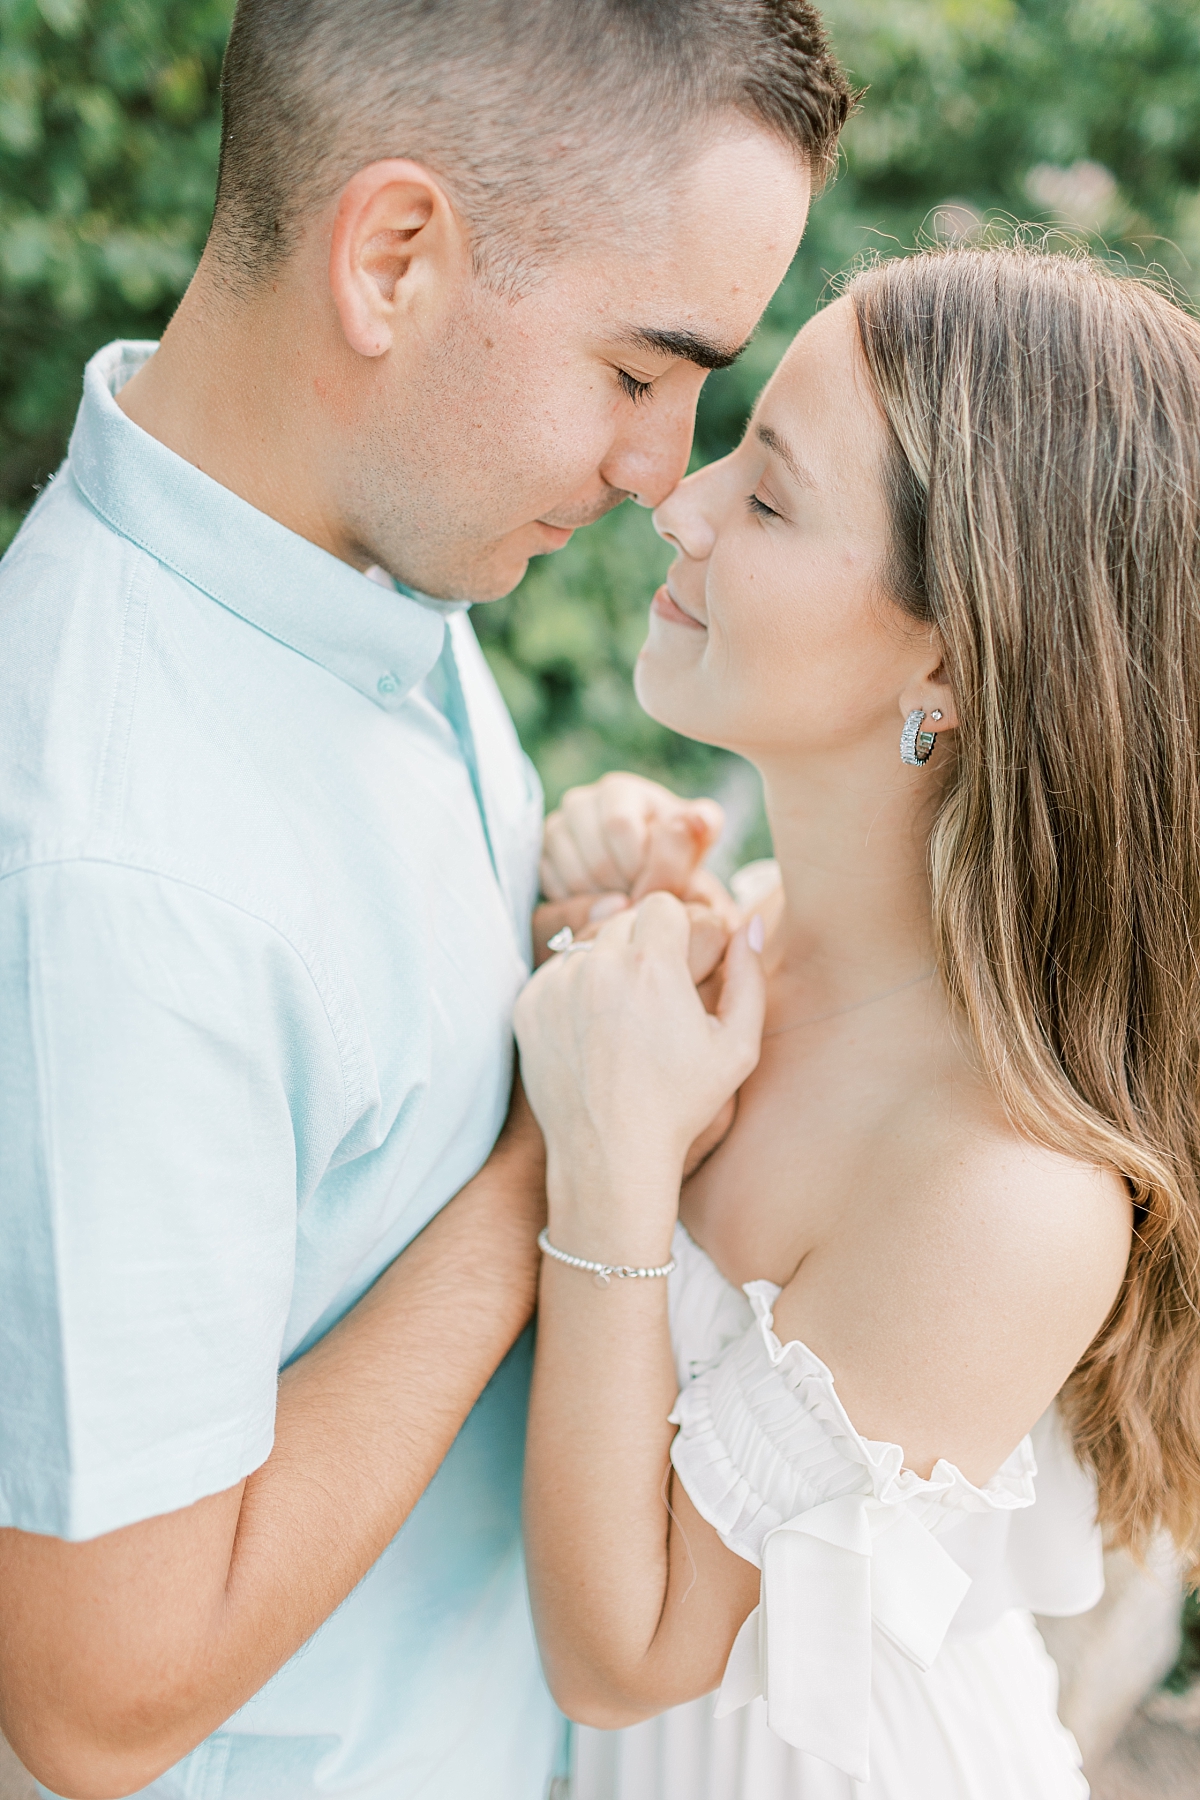 Engagement photo of a couple at Hawk Mountain Sanctuary in PA. The couple embraces and touches noses